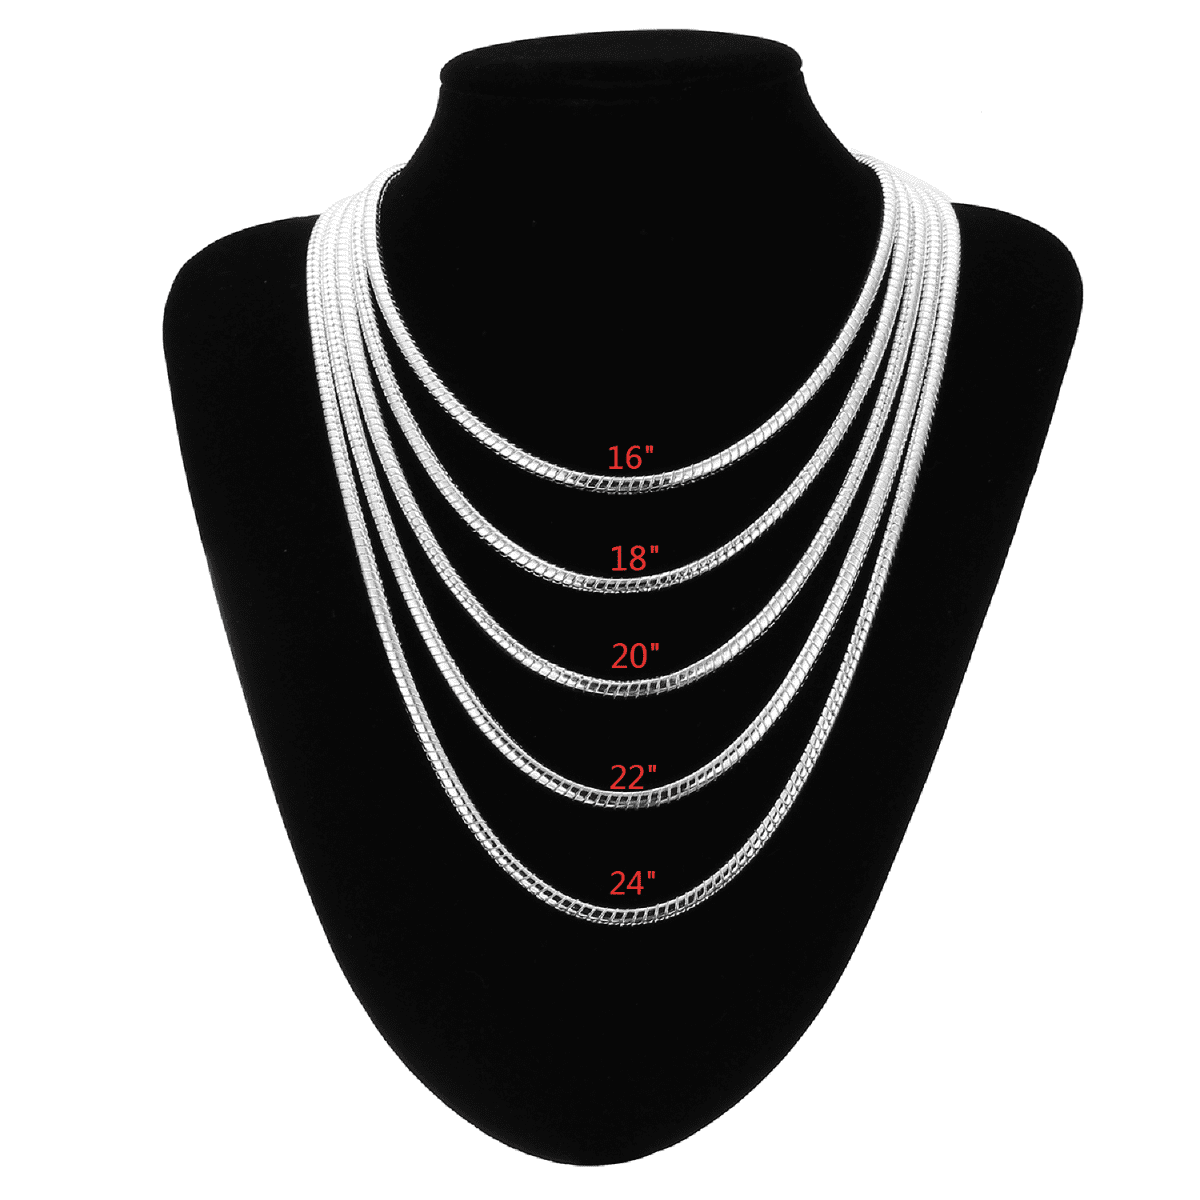 12 INCH STERLING  SILVER PLATED 4MM NECKLACE EXTENDER WITH SPRING RING CLASP